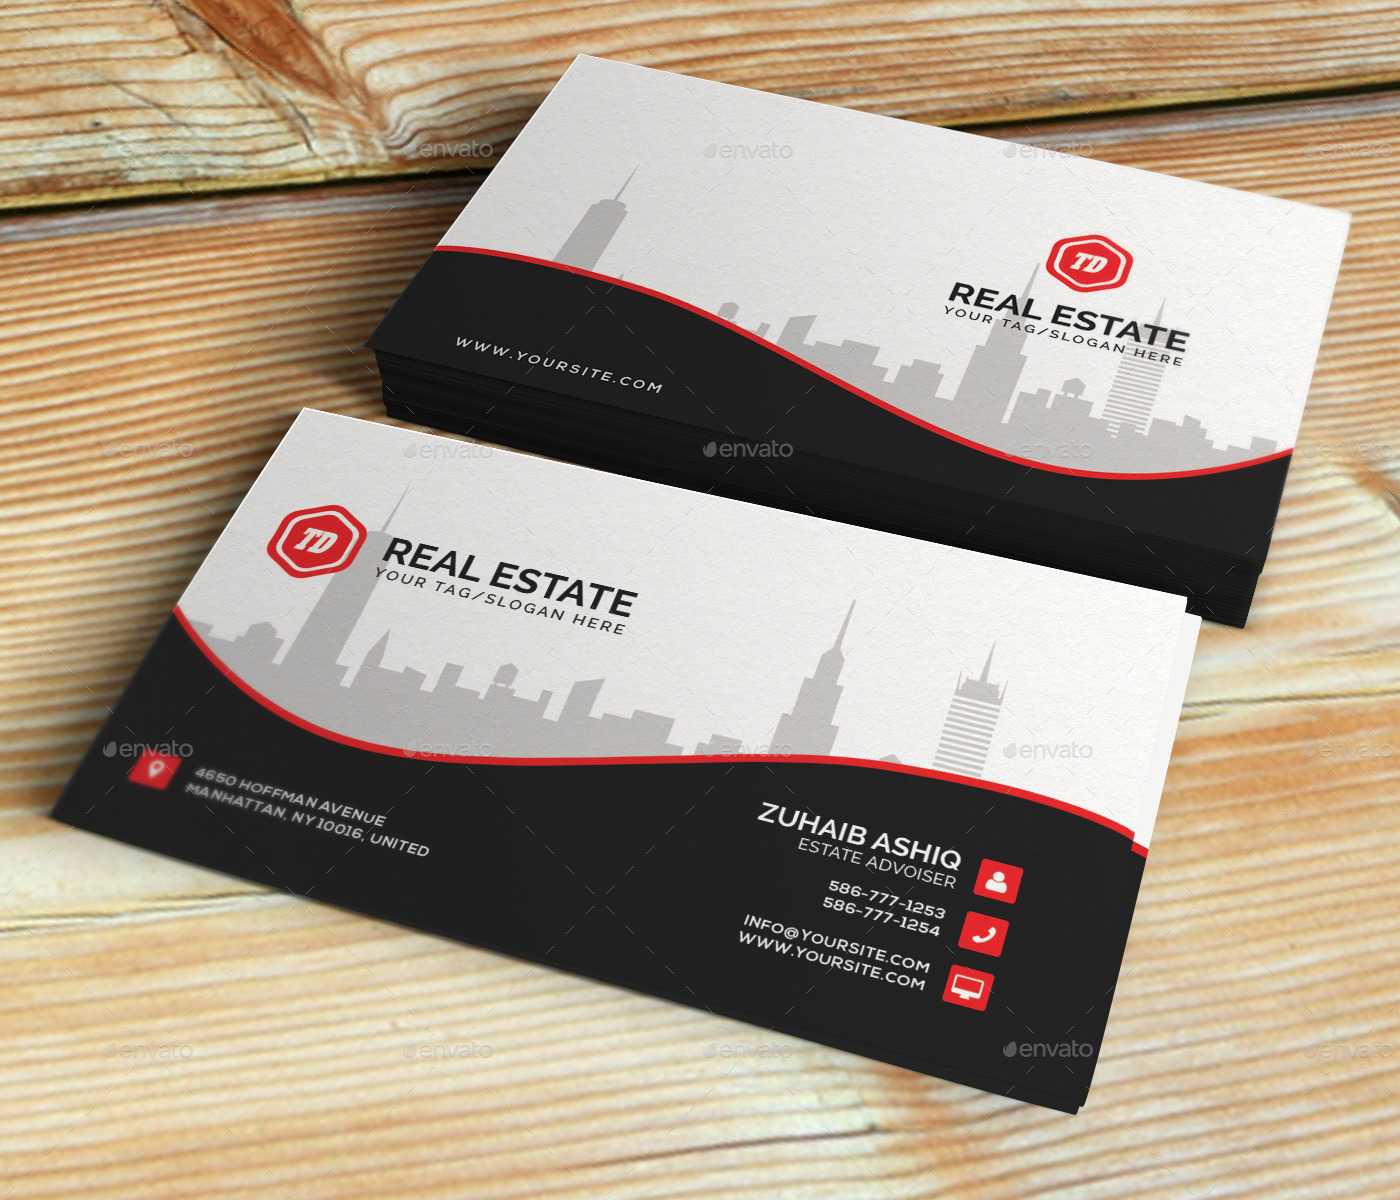 Real Estate – Business Card Template With Regard To Real Estate Business Cards Templates Free